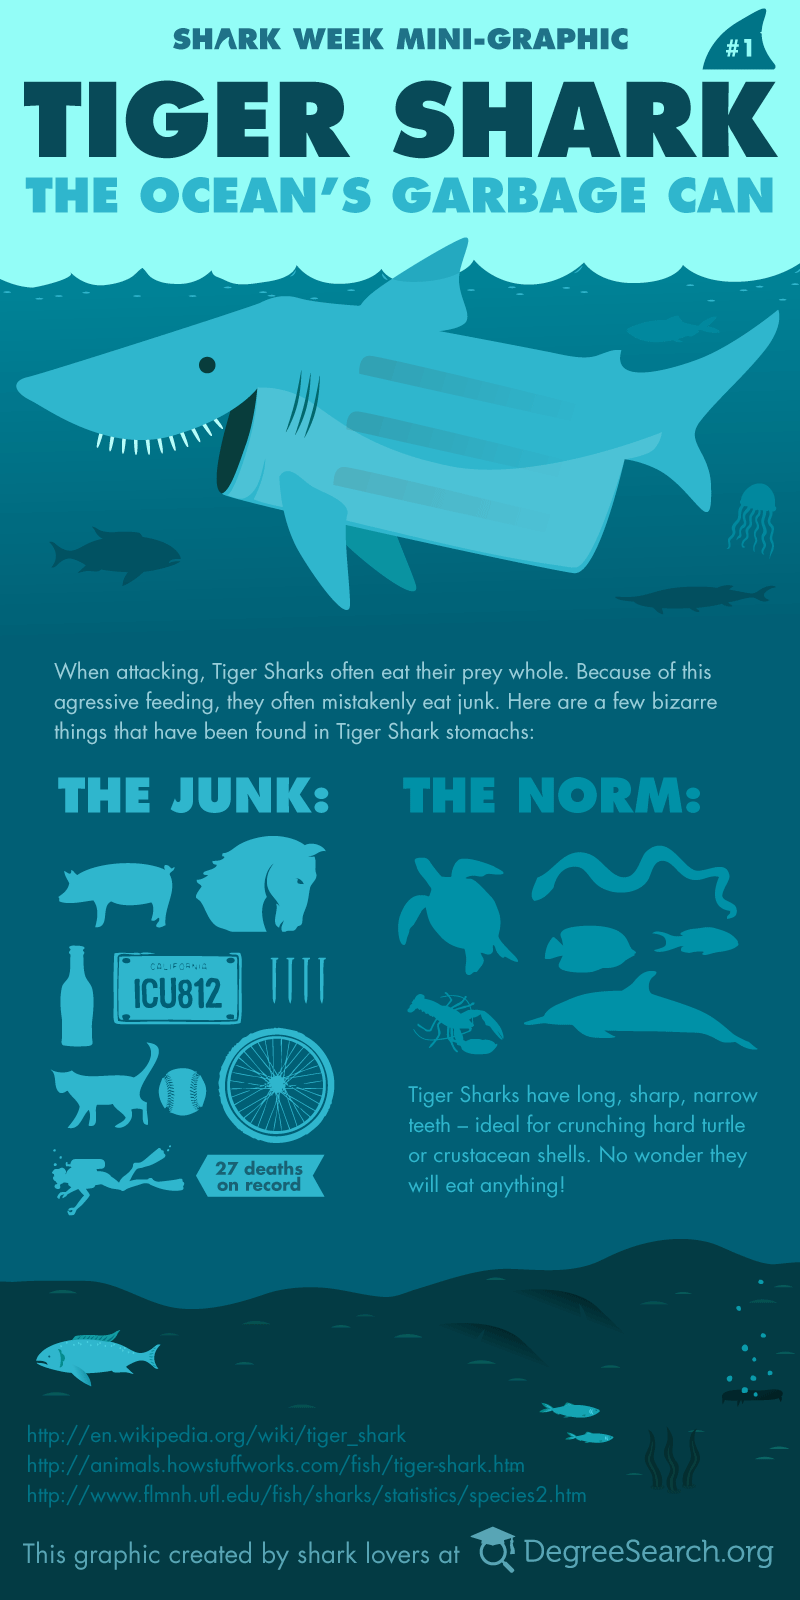 Tiger Shark - The Ocean's Garbage Can Infographic